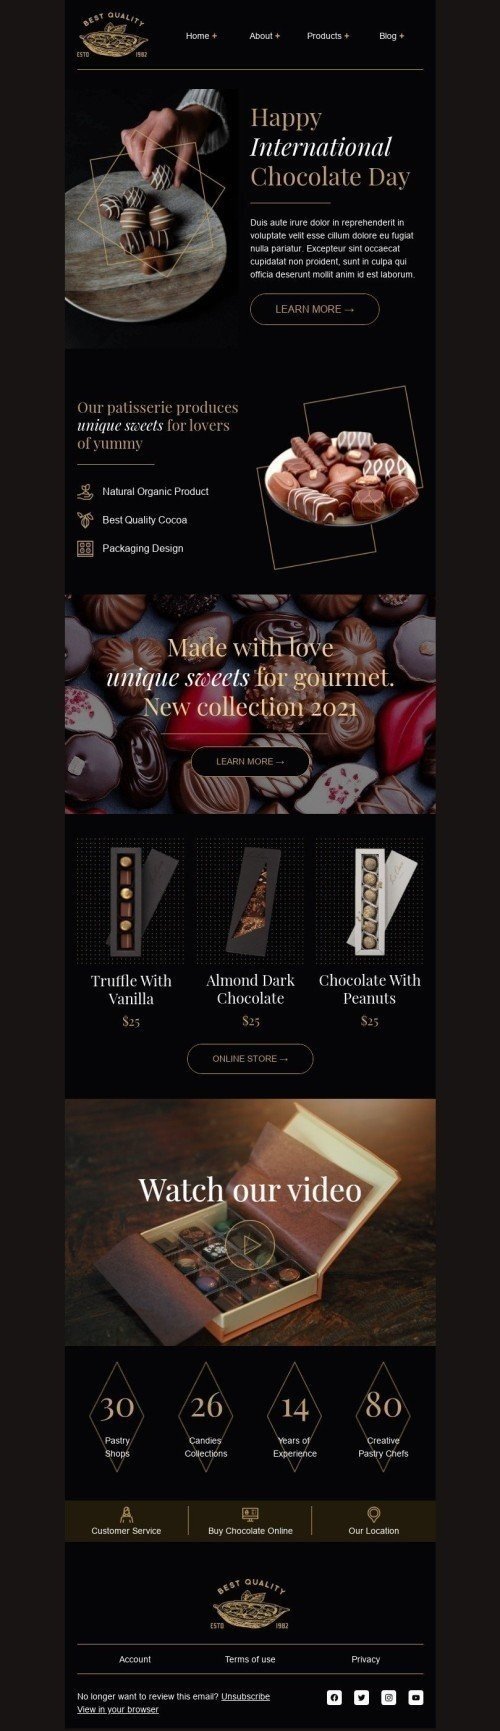 International Chocolate Day Email Template «Made with love» for Food industry desktop view